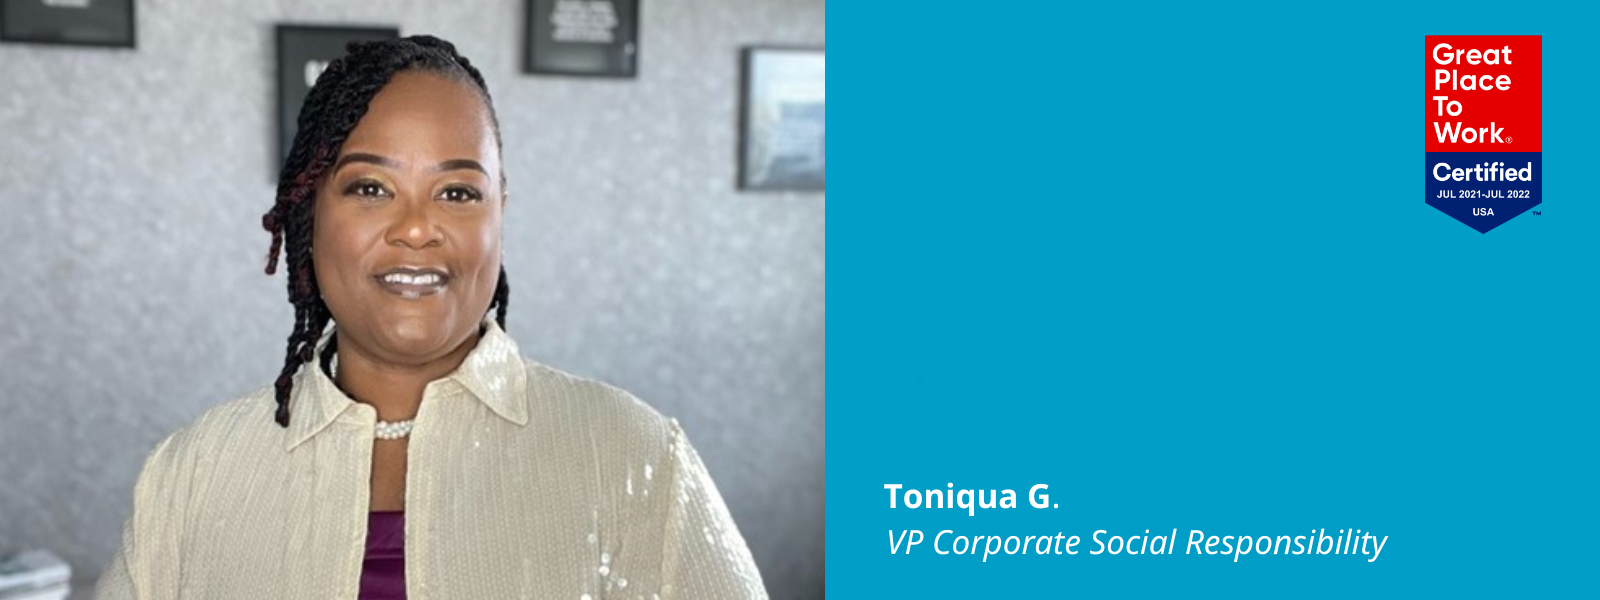 Graphic that inclues a photo of Toniqua G. next to a blue graphical box with text: "Toniqua G. VP Corporate Social Responsibility." The box has a "Great Place To Work Certified" logo in its top right corner for July 2021-July 2022 in the USA.